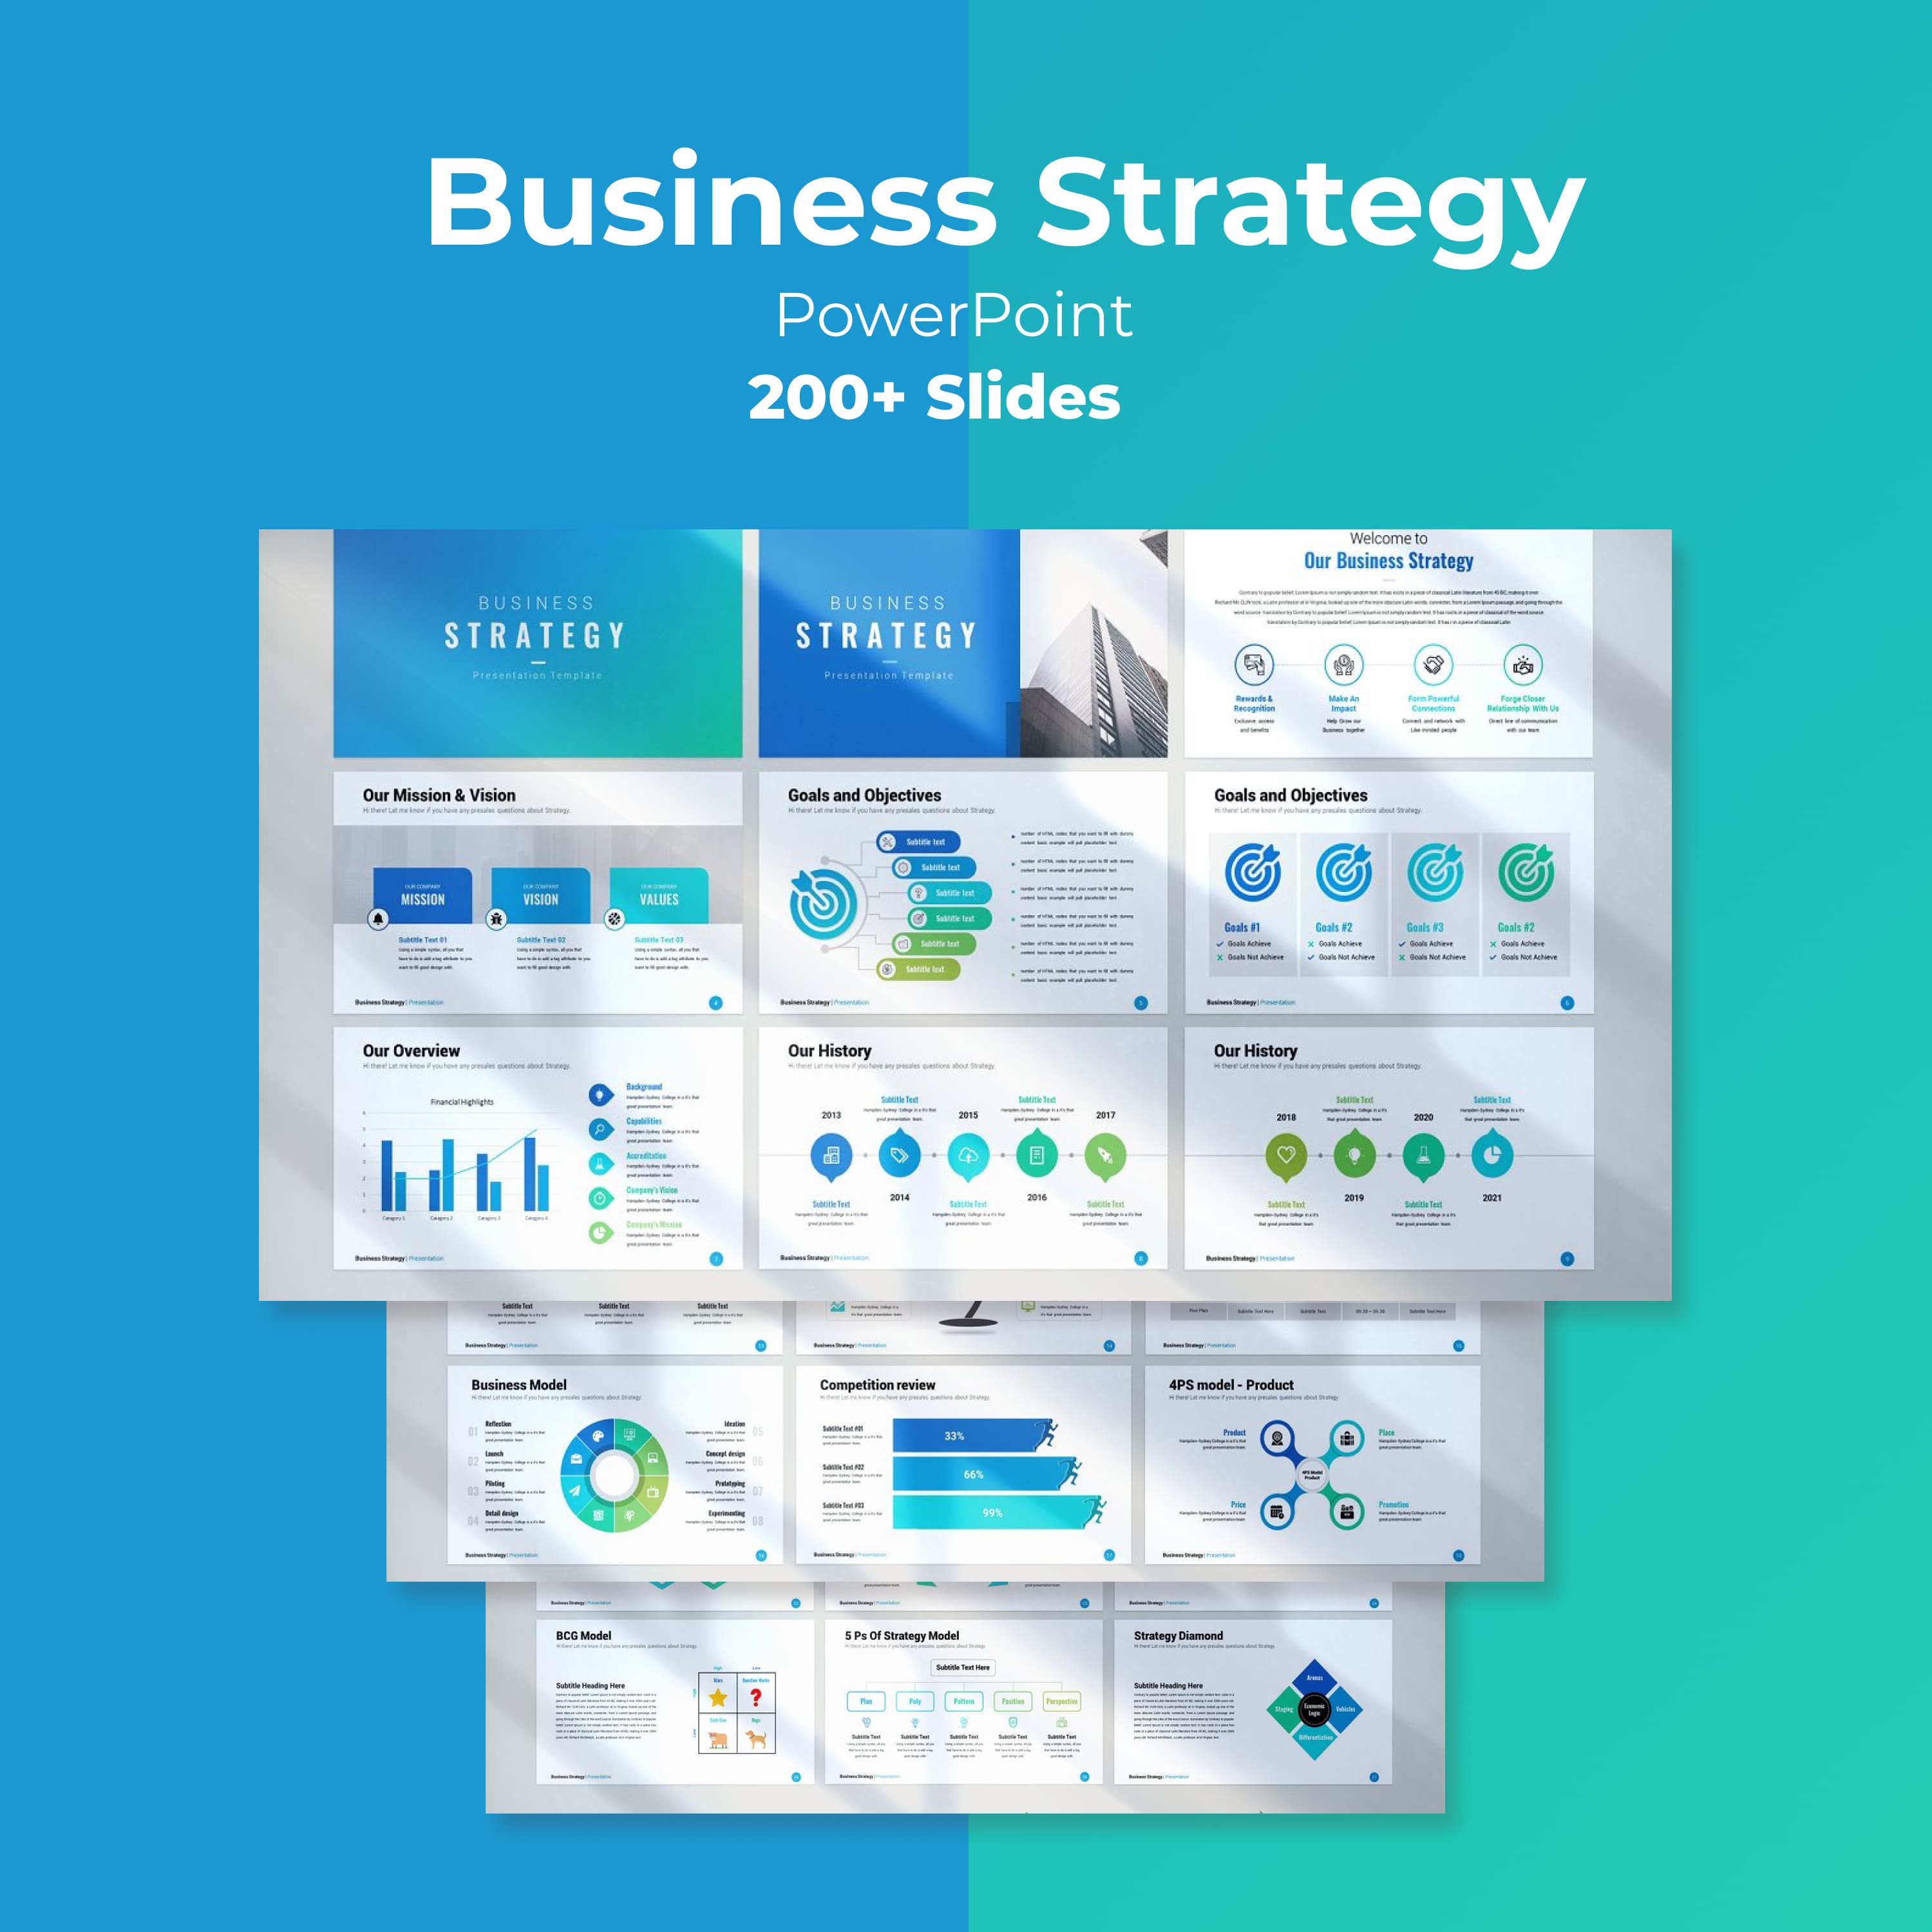 Business Strategy PowerPoint.